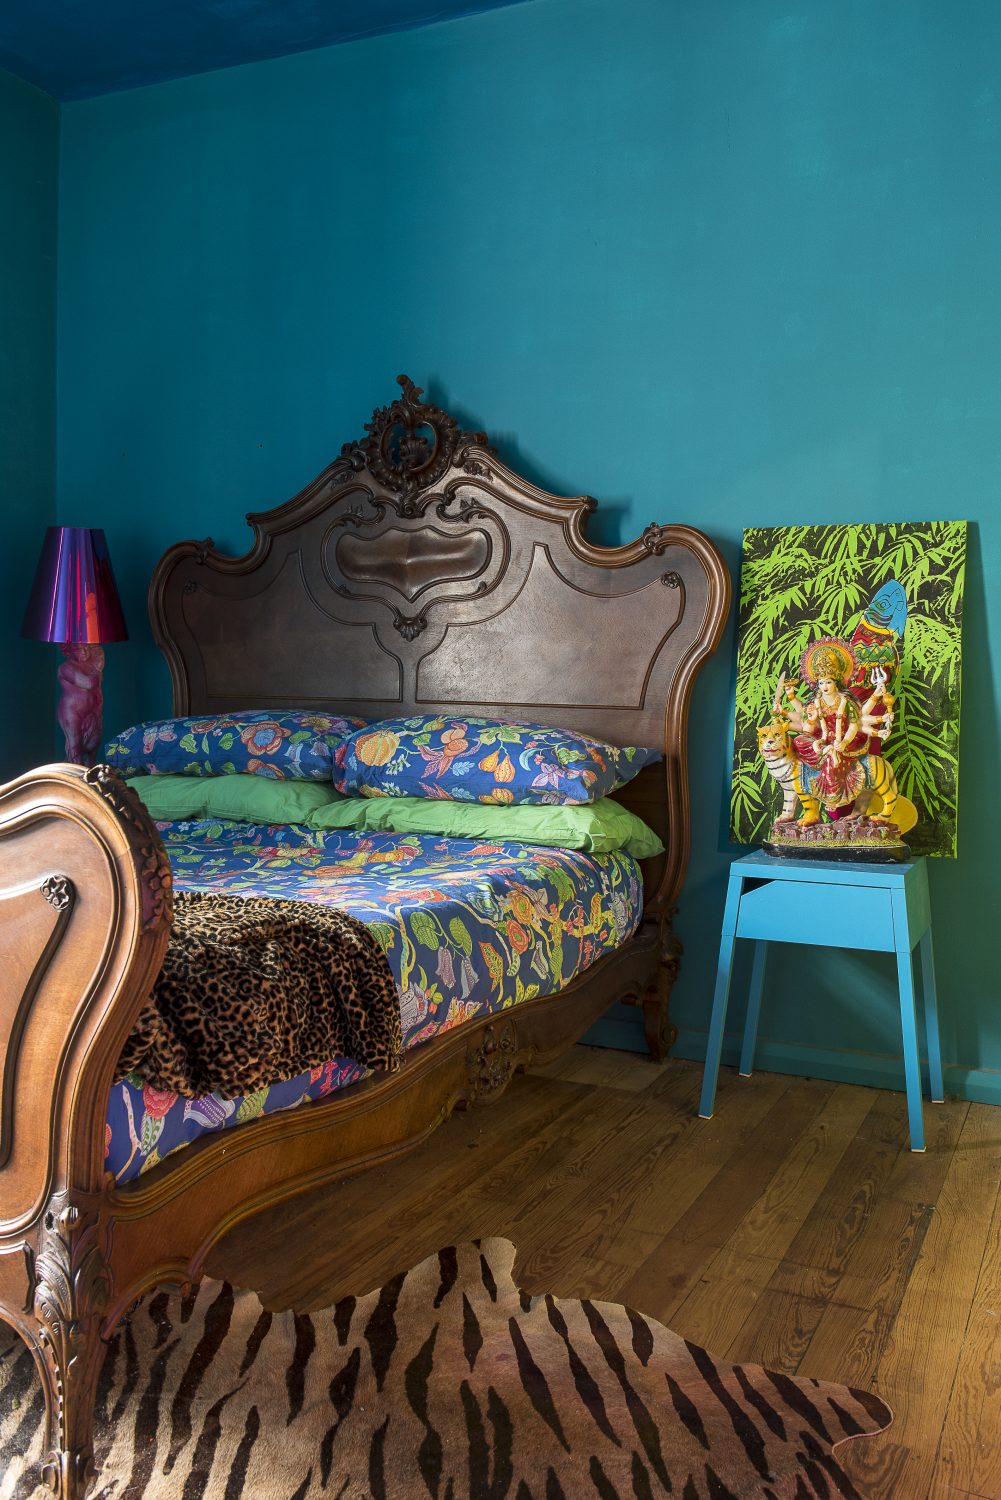 The walls of the bedroom have been painted a deep teal colour. “I was worried when I painted this room, as it came out much darker than I thought it would, but now the furniture’s in, it looks okay,” says Amy